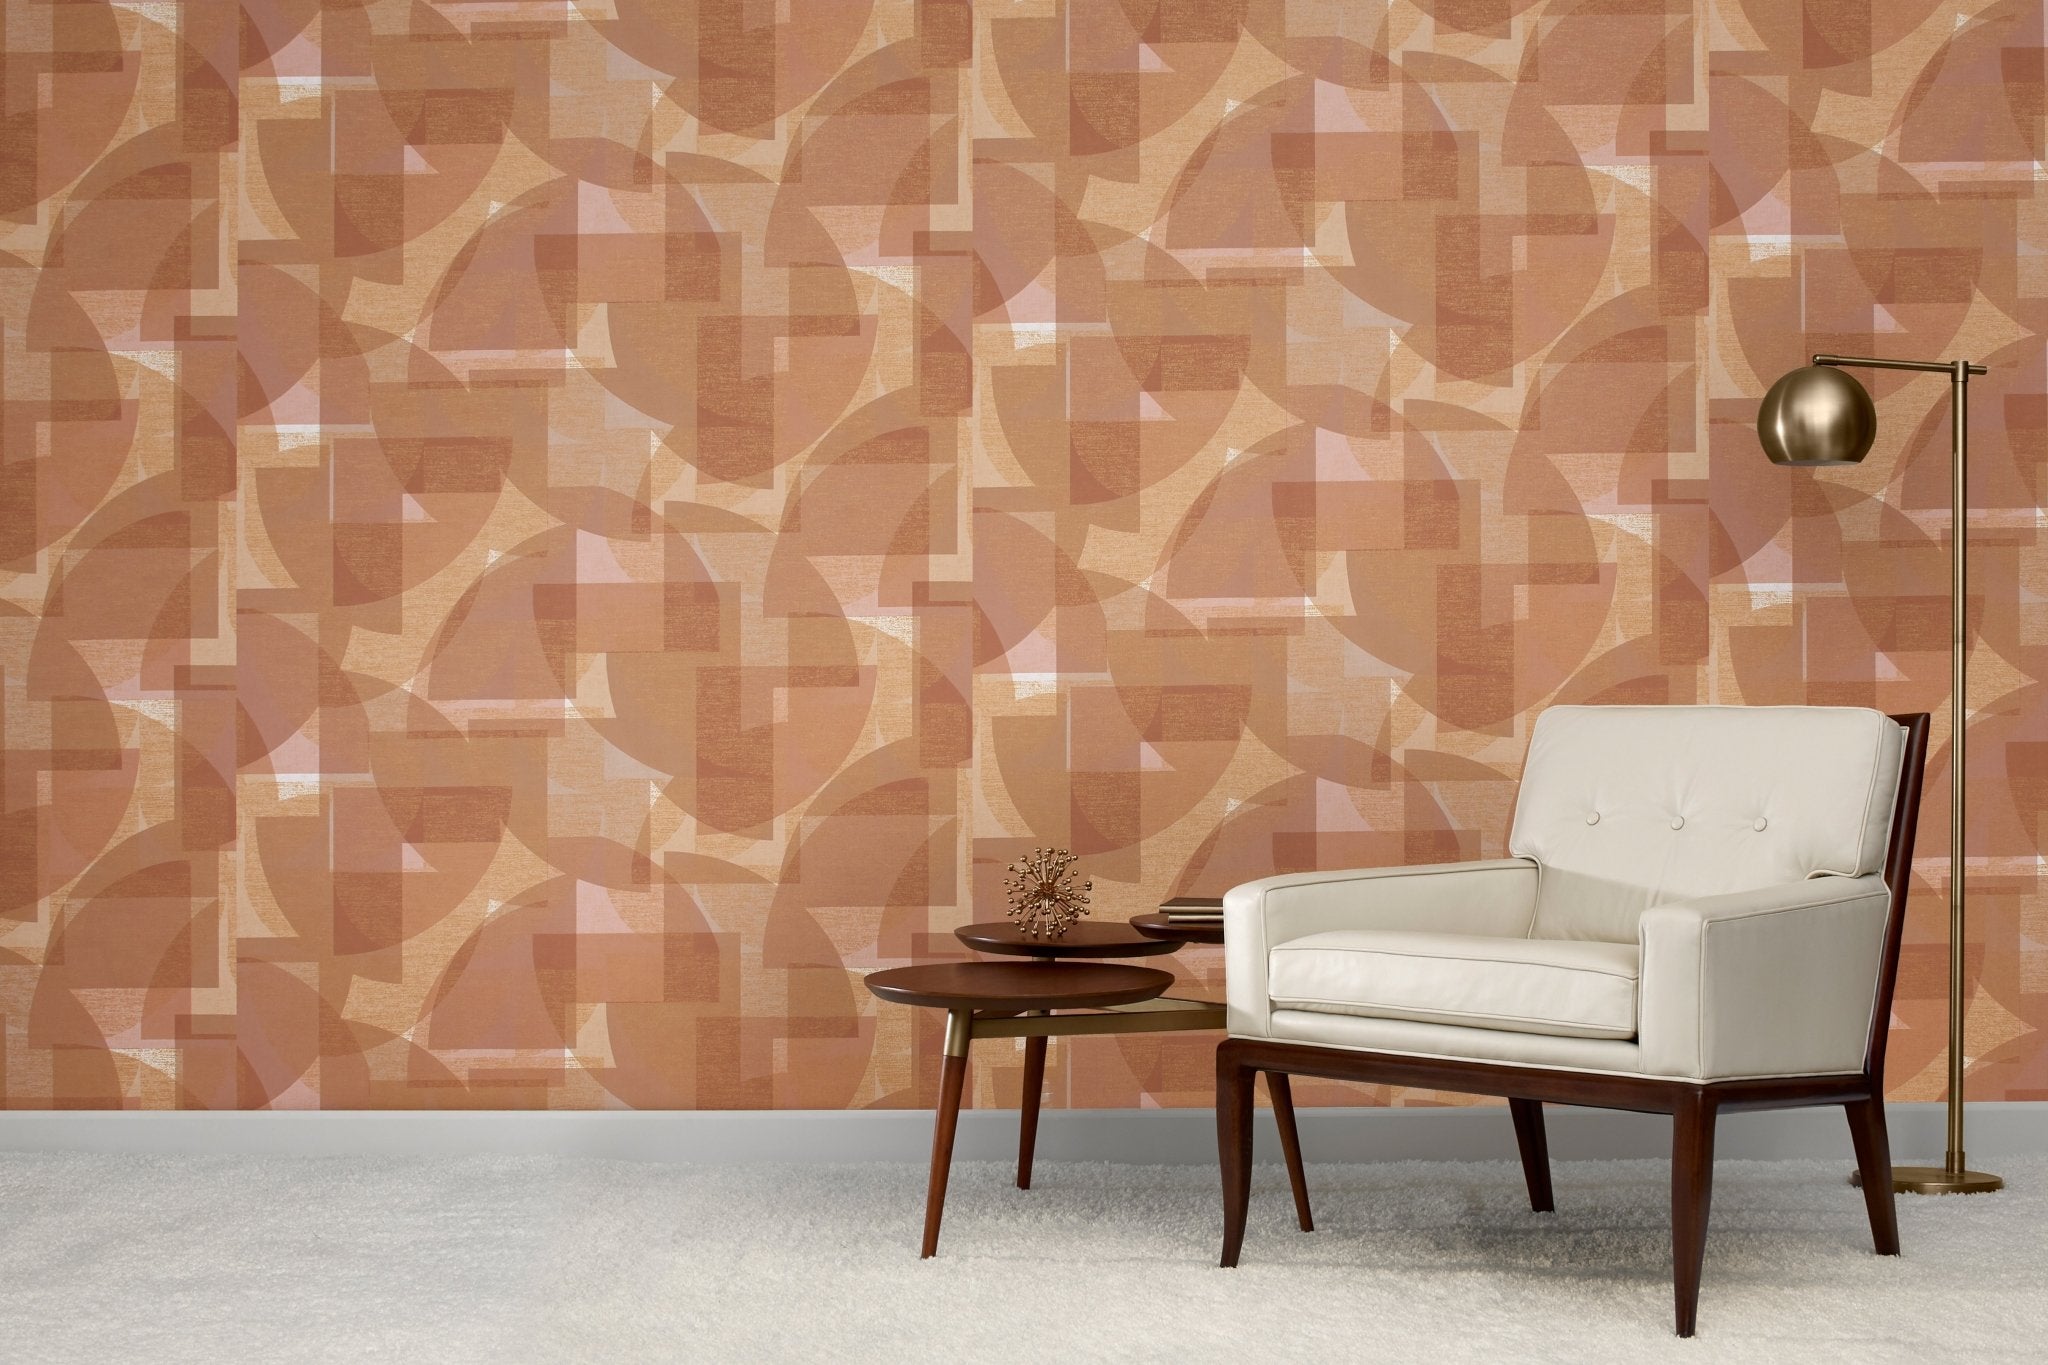 Shape Shift - Y47920 - Wallcovering - Vycon - Kube Contract